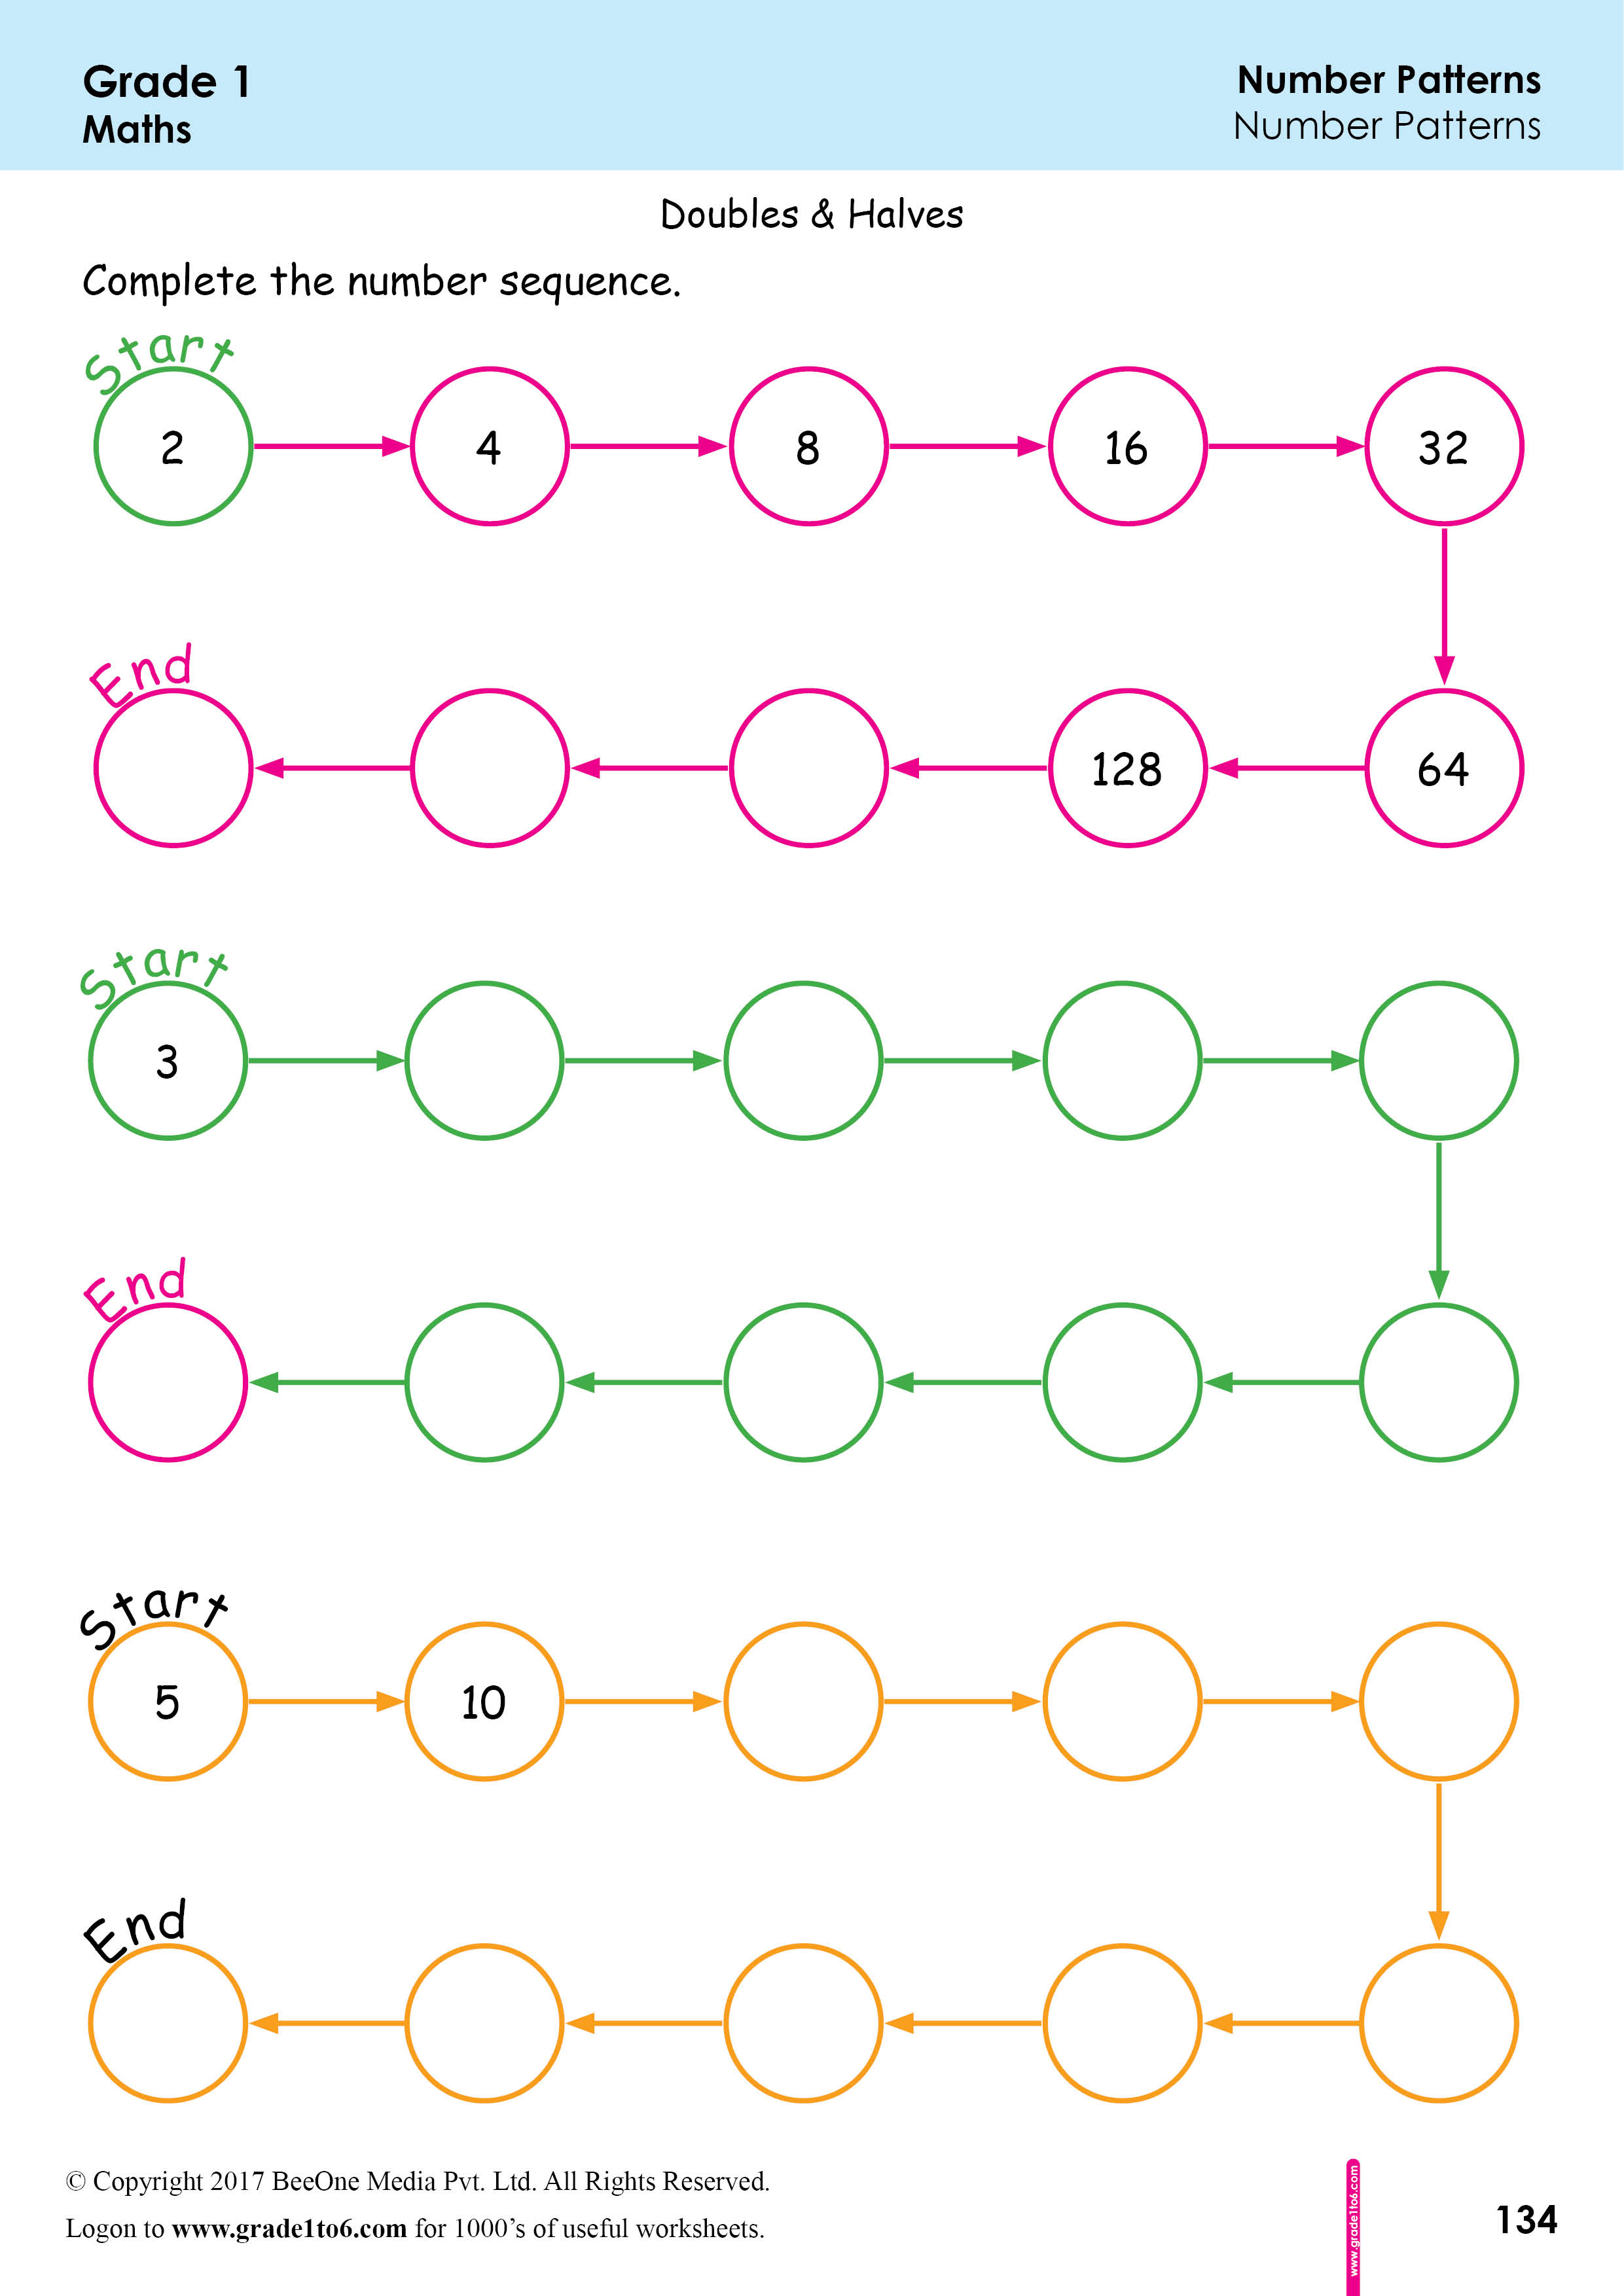 doubling-halving-numbers-worksheets-www-grade1to6